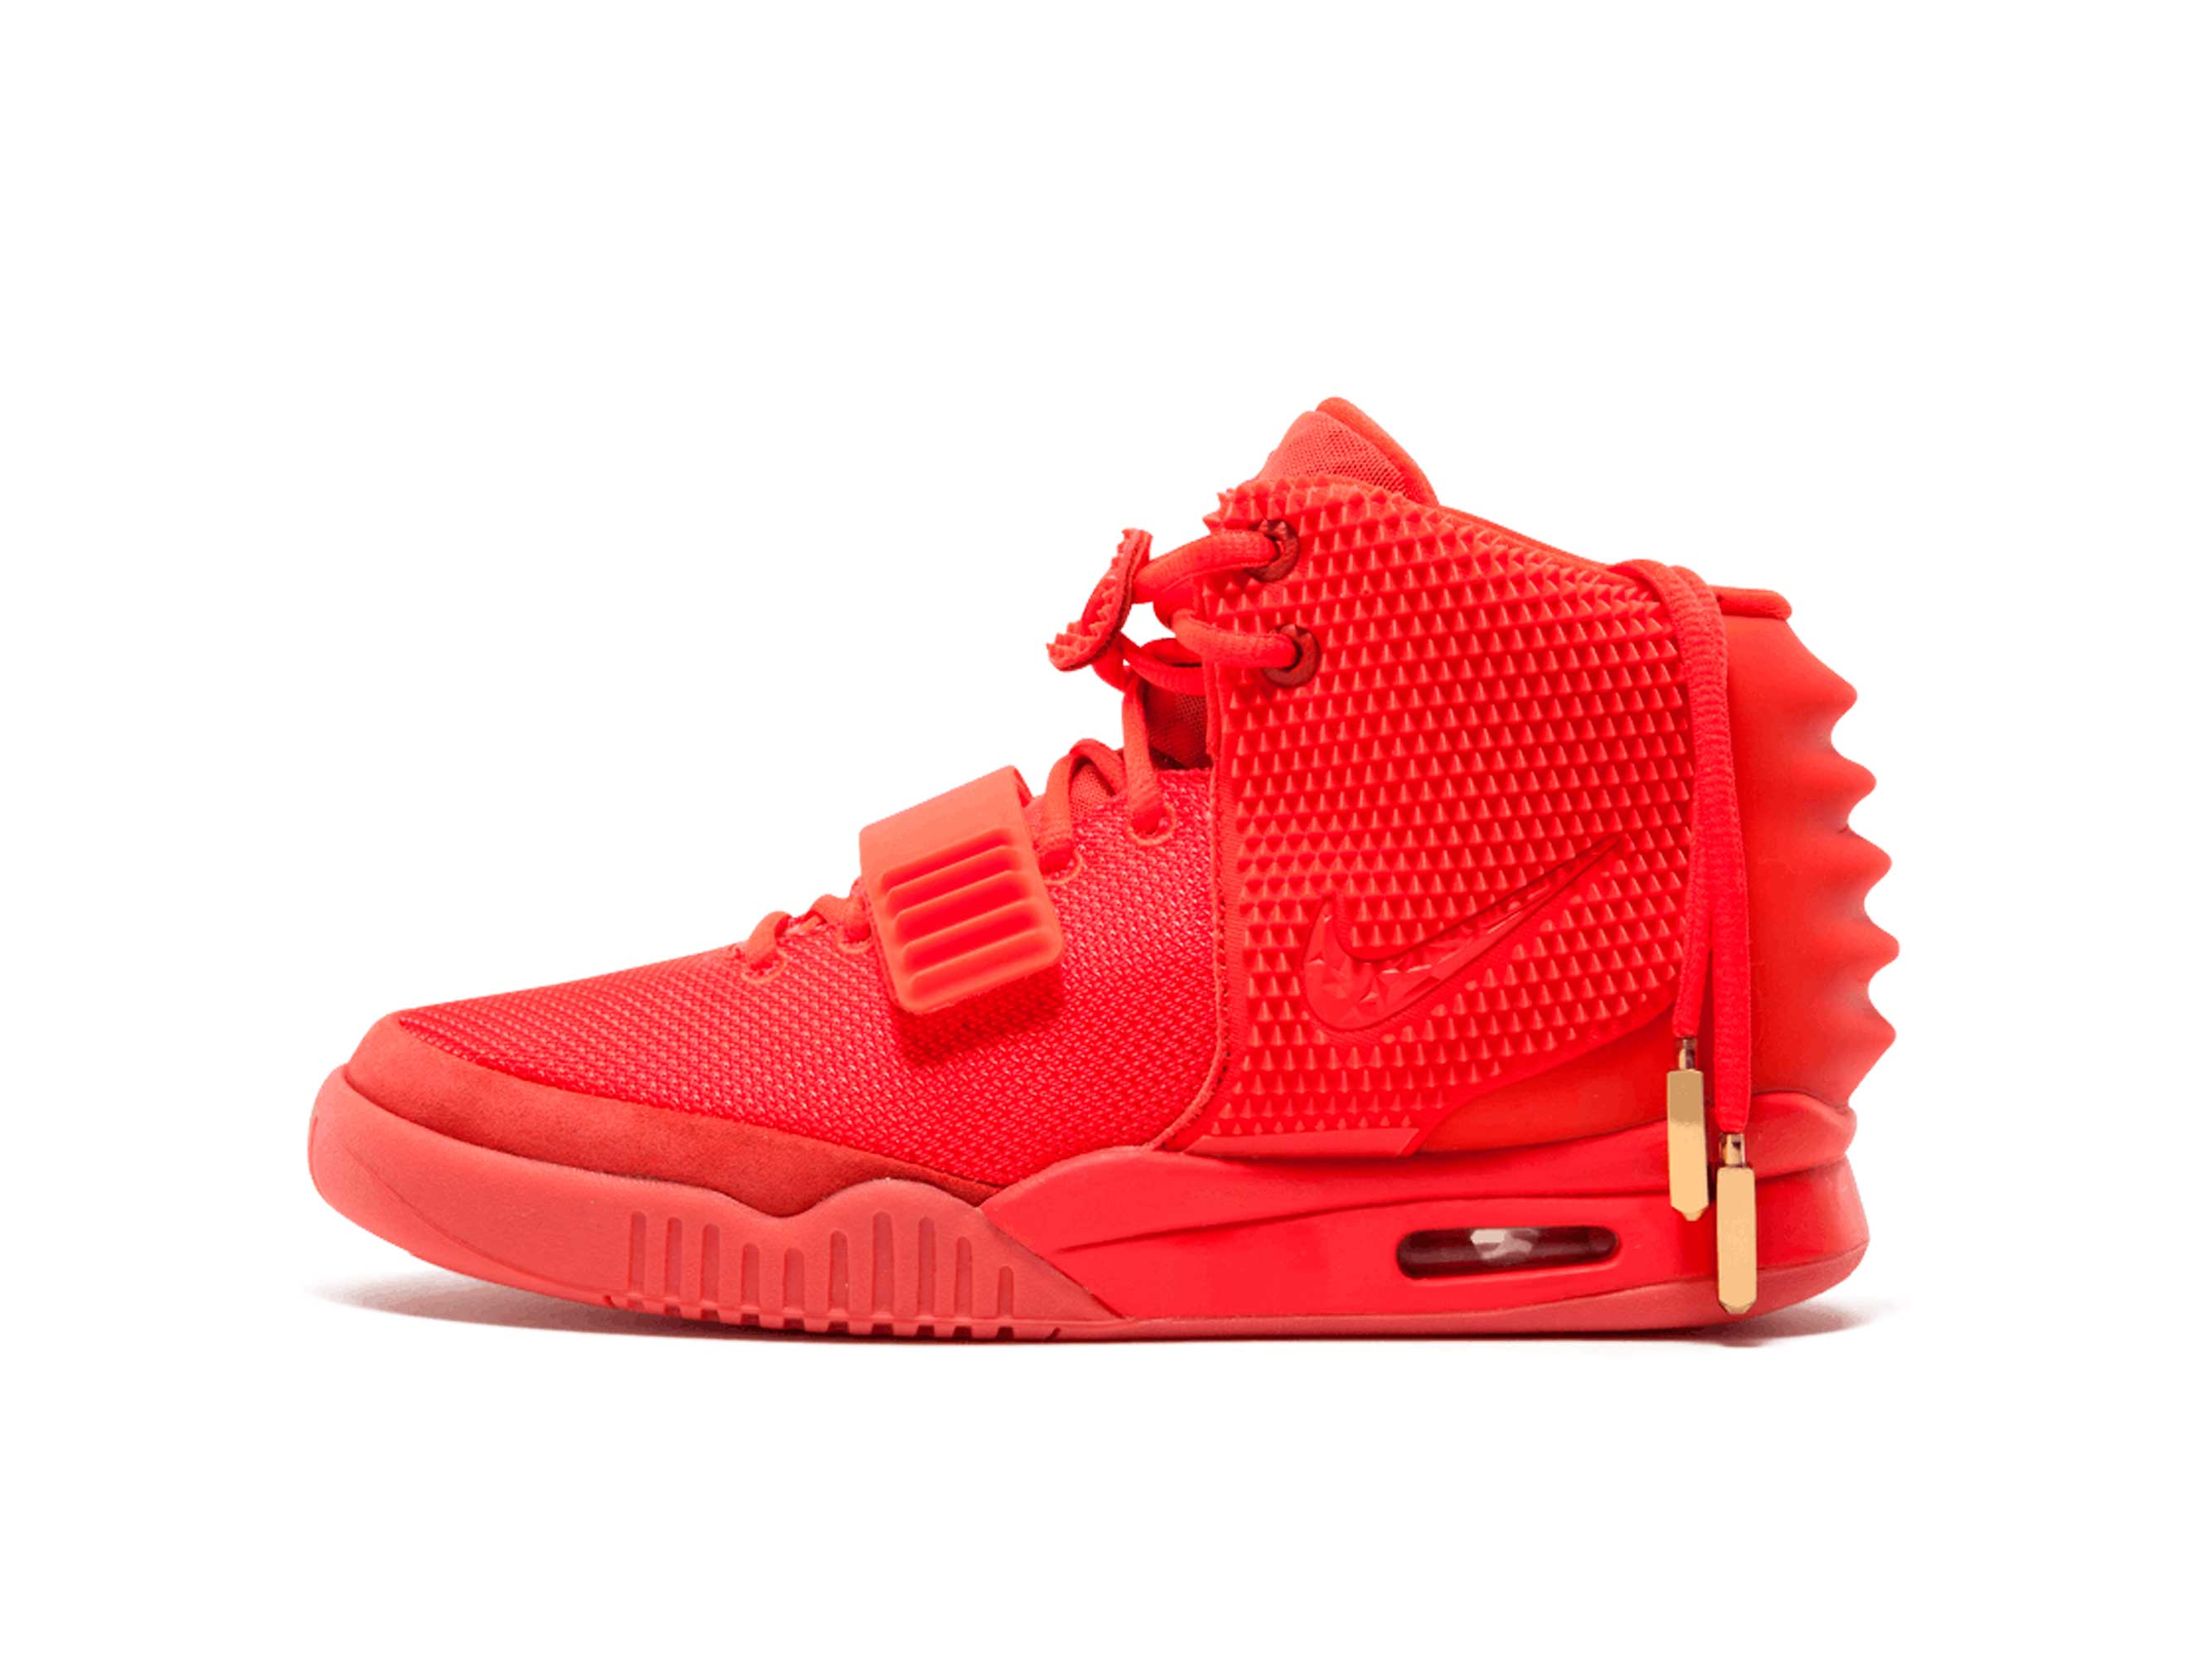 nike x kanye west air yeezy 2 red october